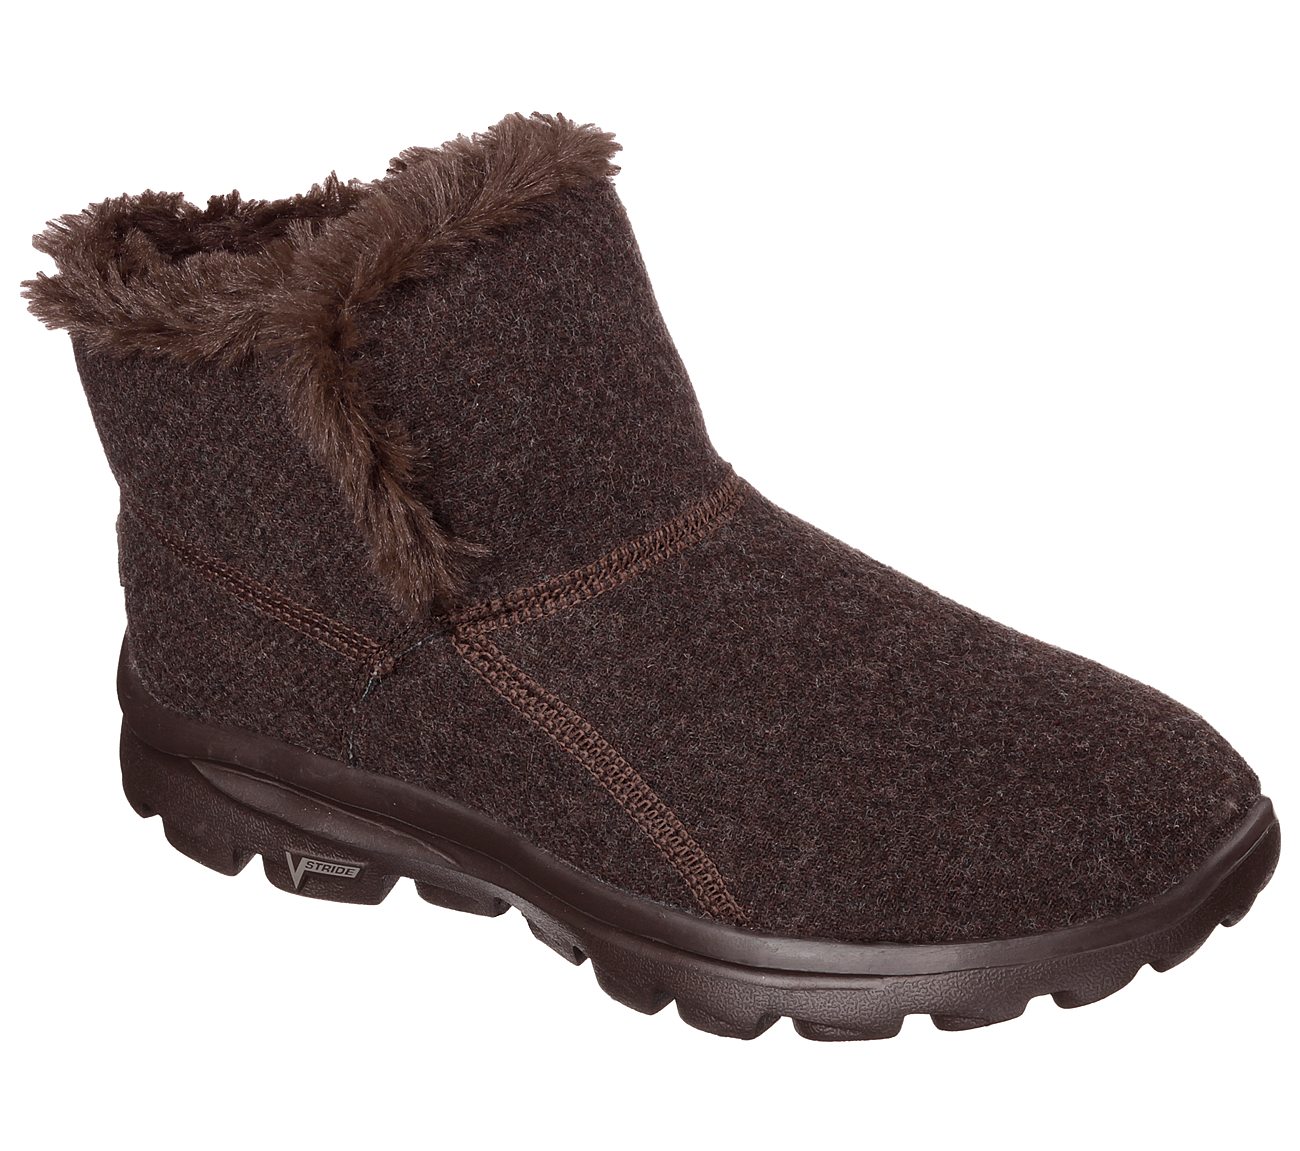 skechers go walk ankle boots Sale,up to 